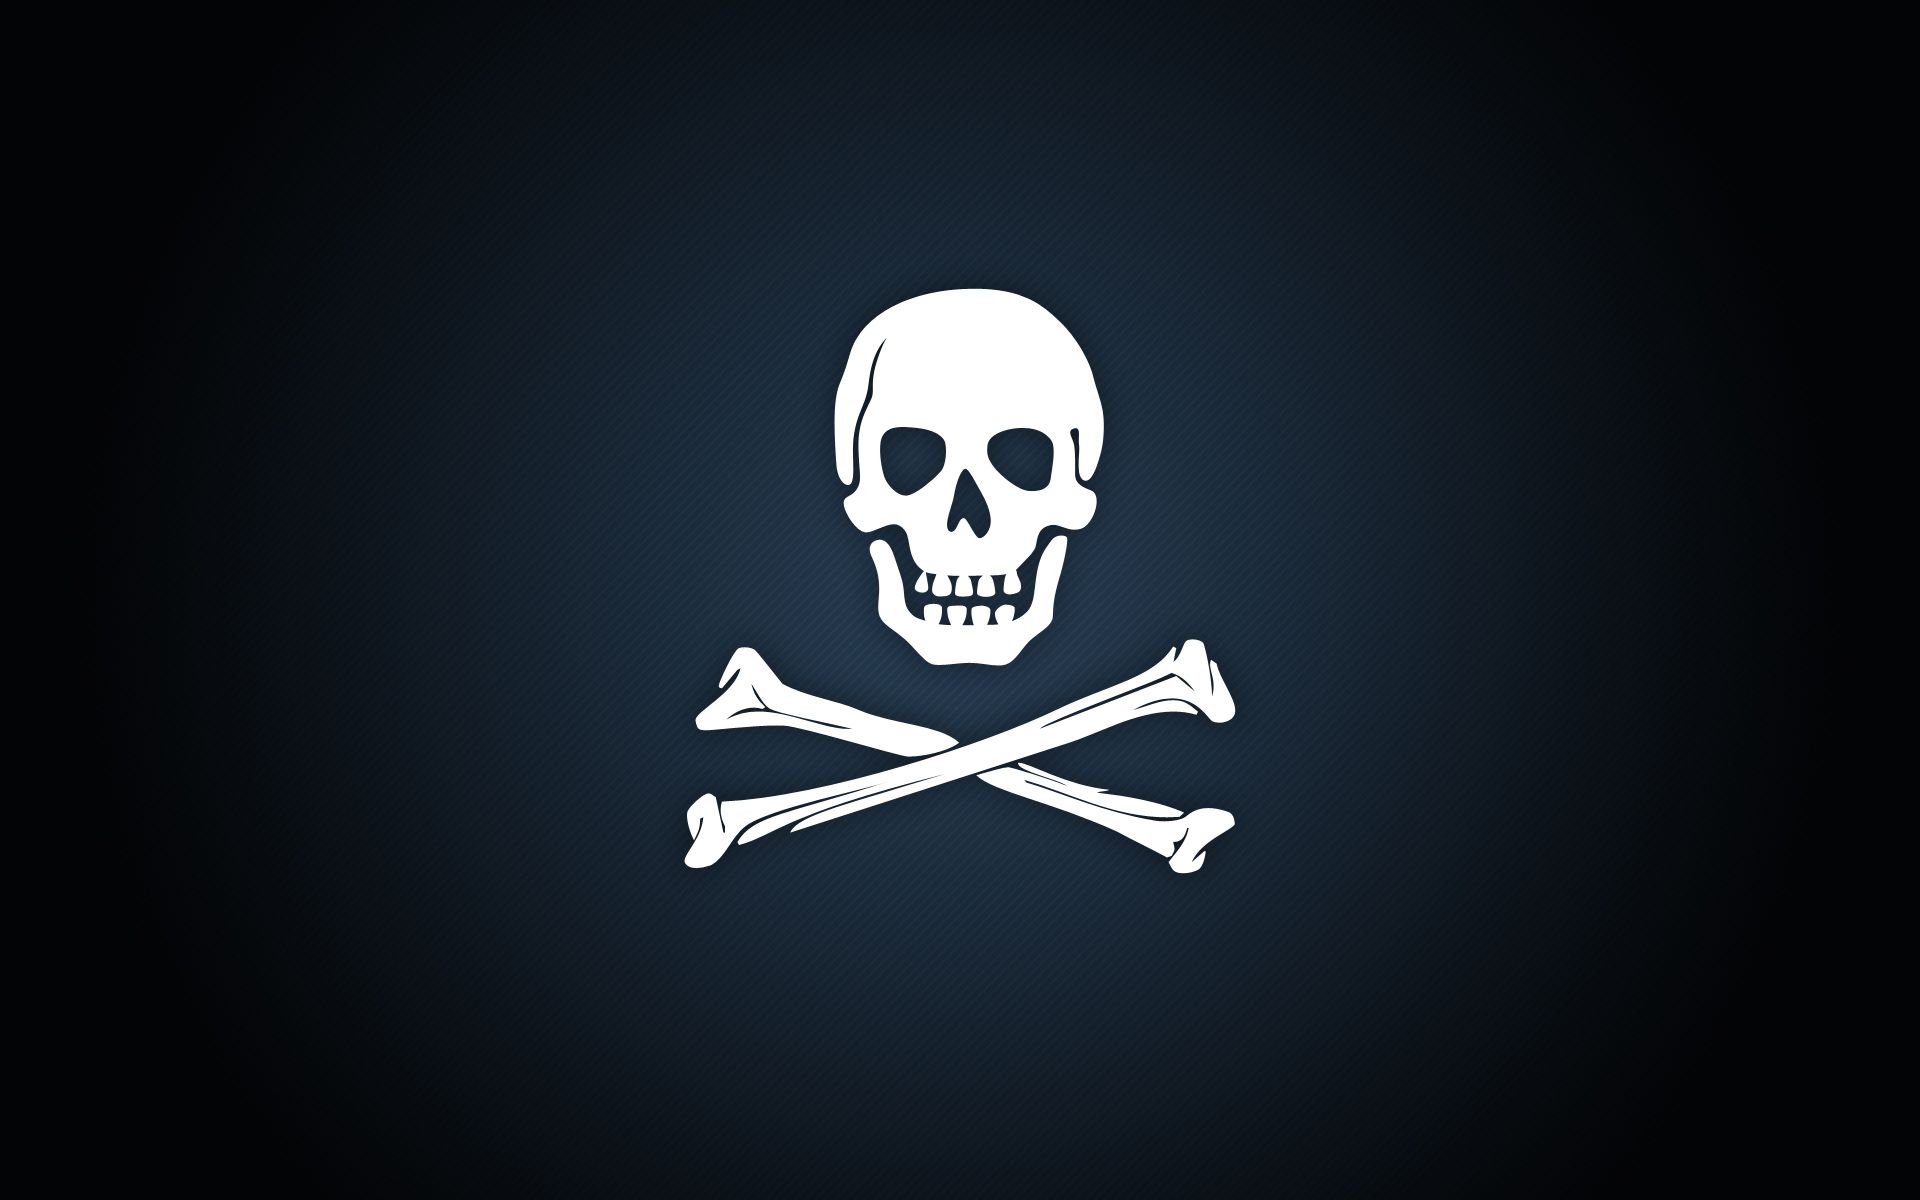 Skull and crossbones wallpaper for android group 79 skull and crossbones wallpaper for android group 79 - Pirate